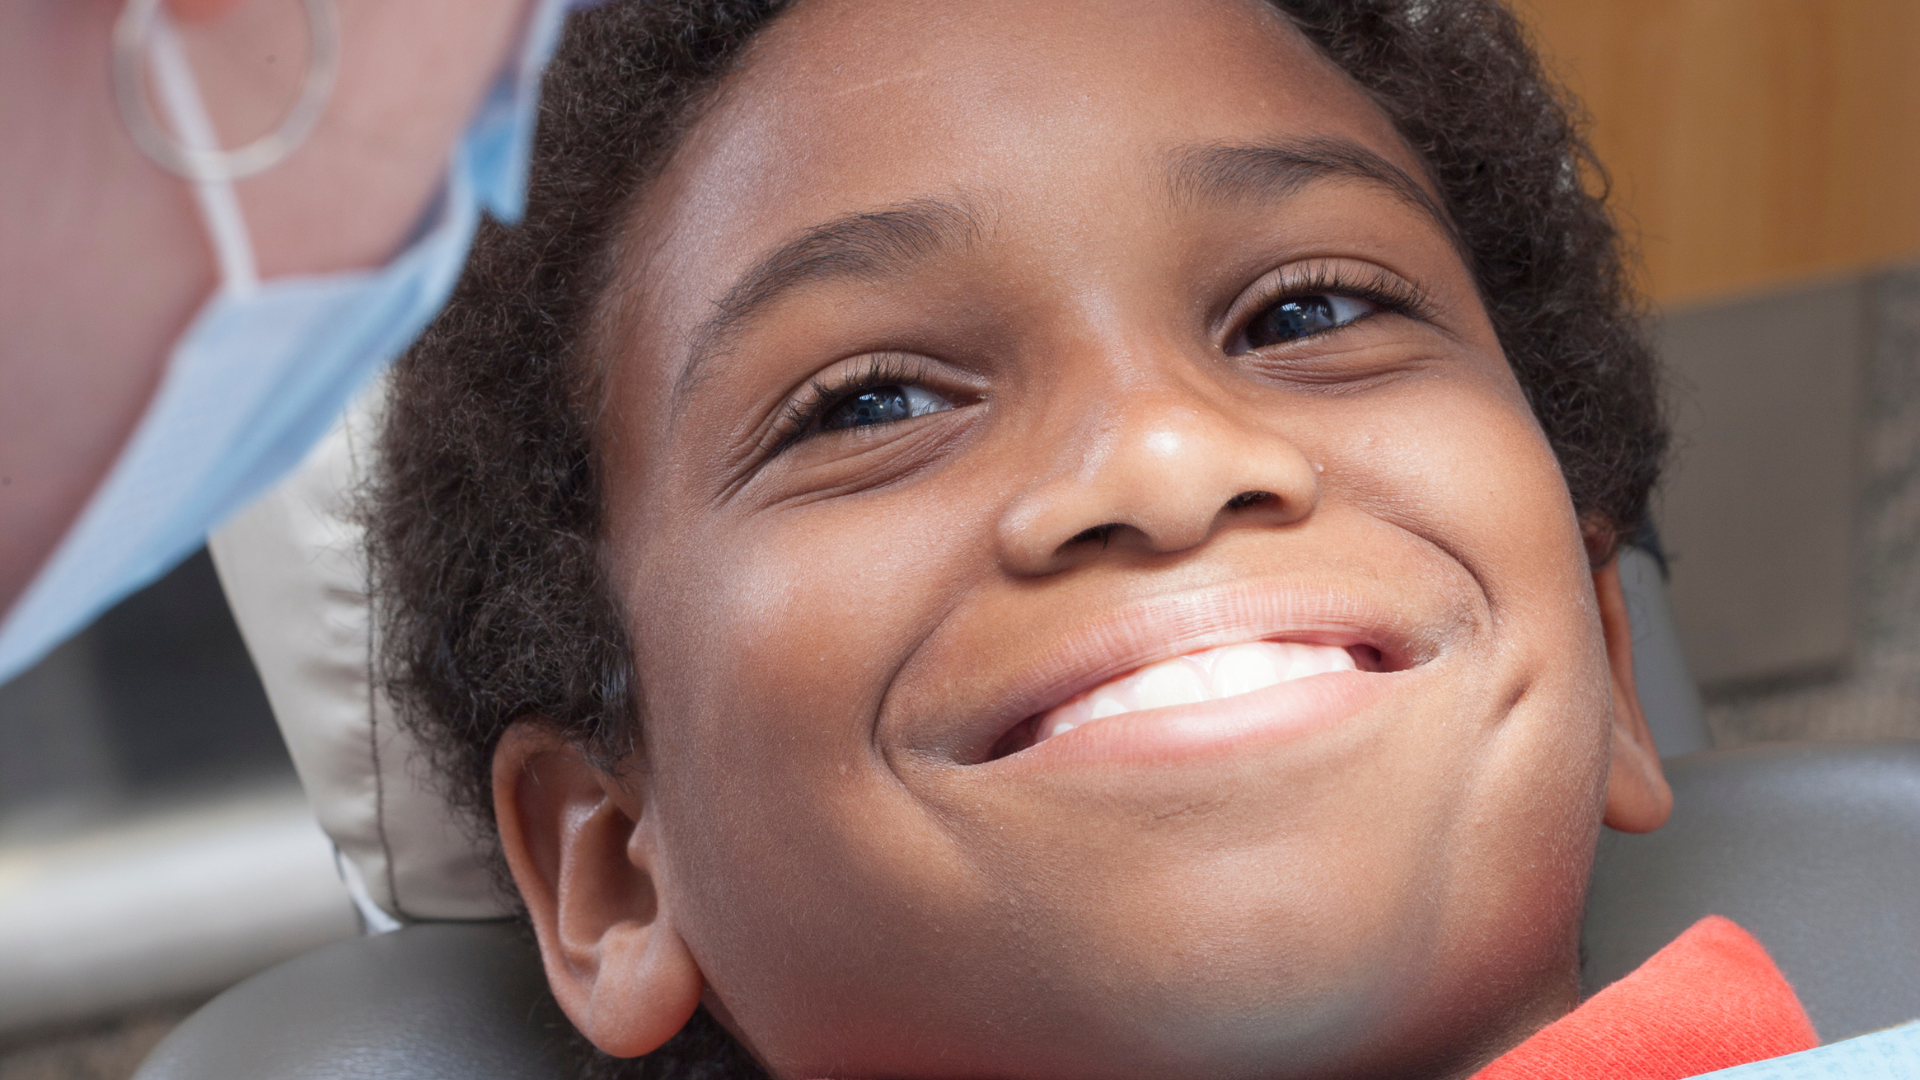 Child smiling Oral Health equity